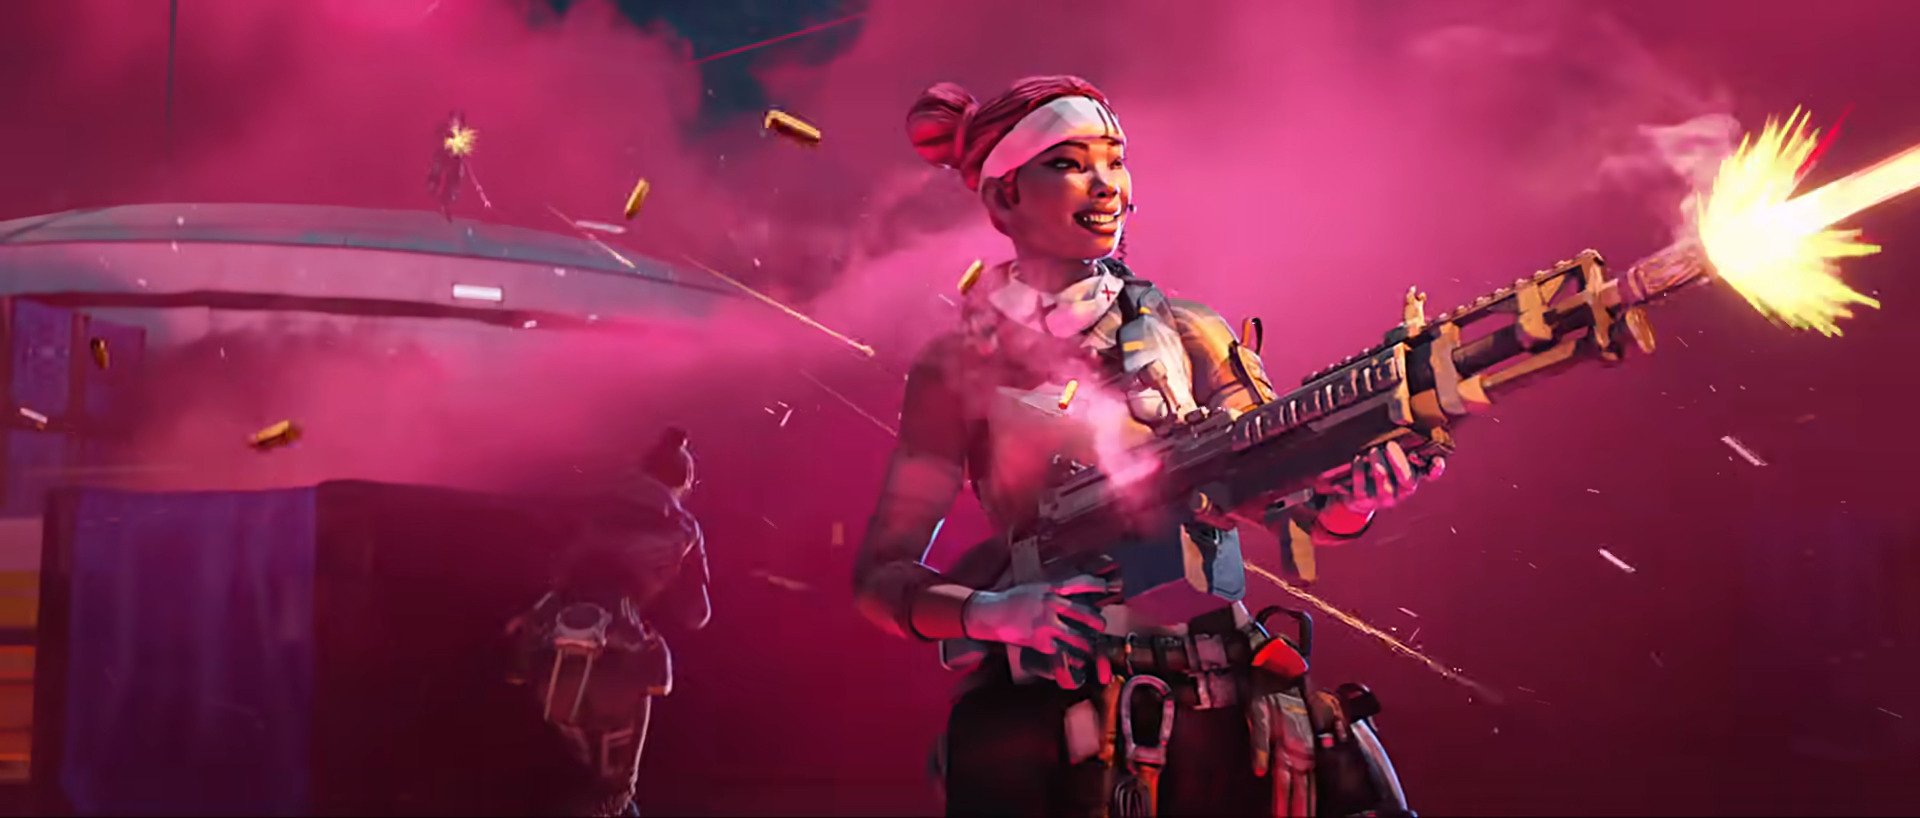 Apex Legends Season 7 Continues To Suffer From Audio Problems, Despite The Hotfix That Addressed Some Issues